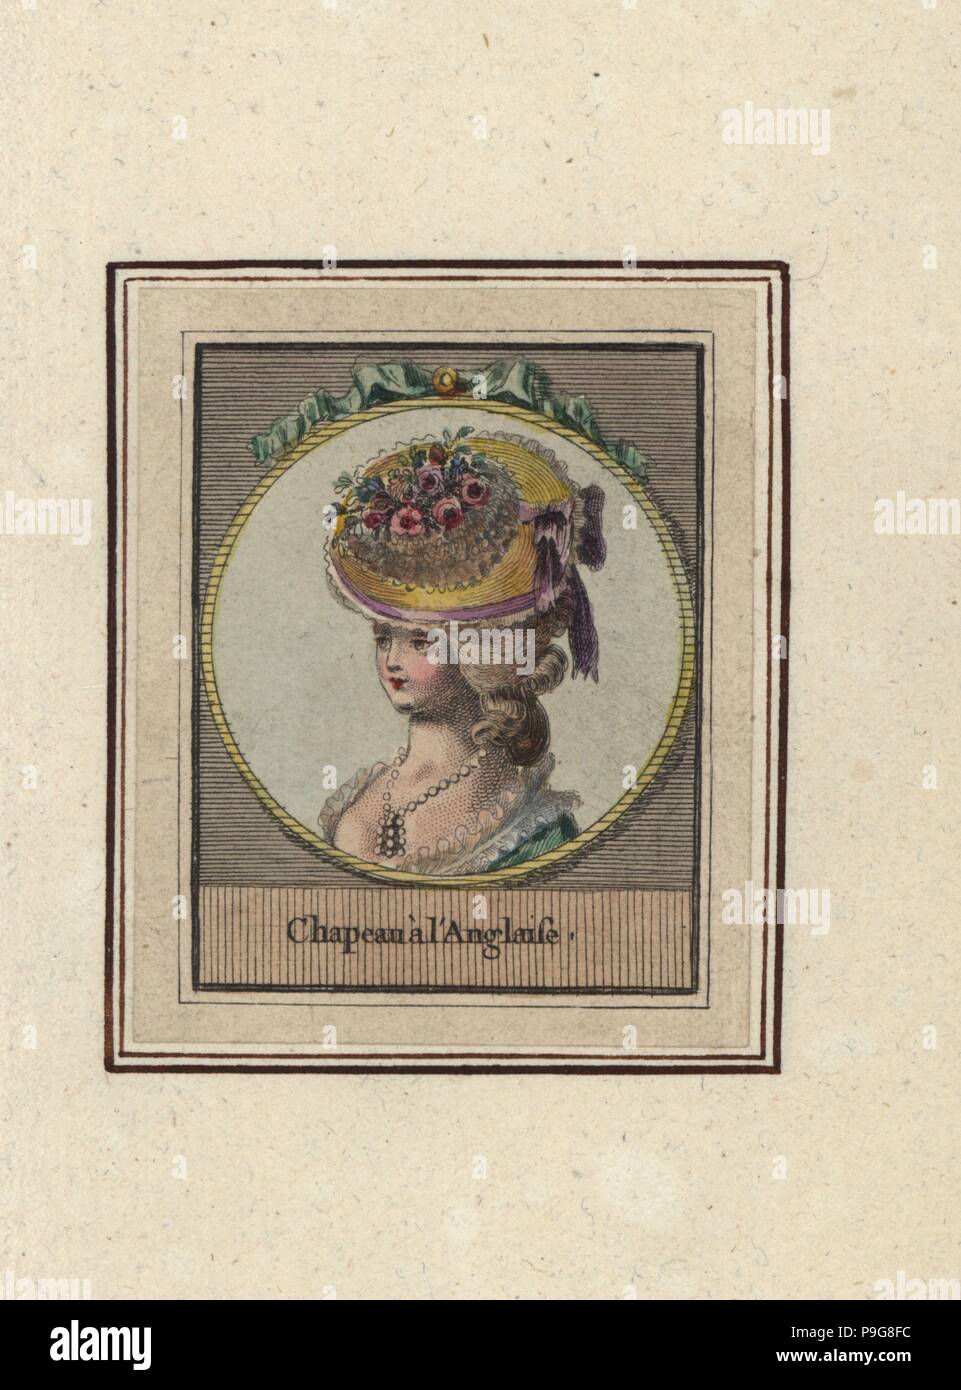 Woman in English-style hat decorated with ribbons and flowers. Chapeau a l’Anglaise. Handcoloured copperplate engraving by an unknown artist from an Album of Fashionable Hairstyles of 1783, Suite des Coeffures a la Mode en 1783, Esnauts et Rapilly, Paris, 1783. Stock Photo